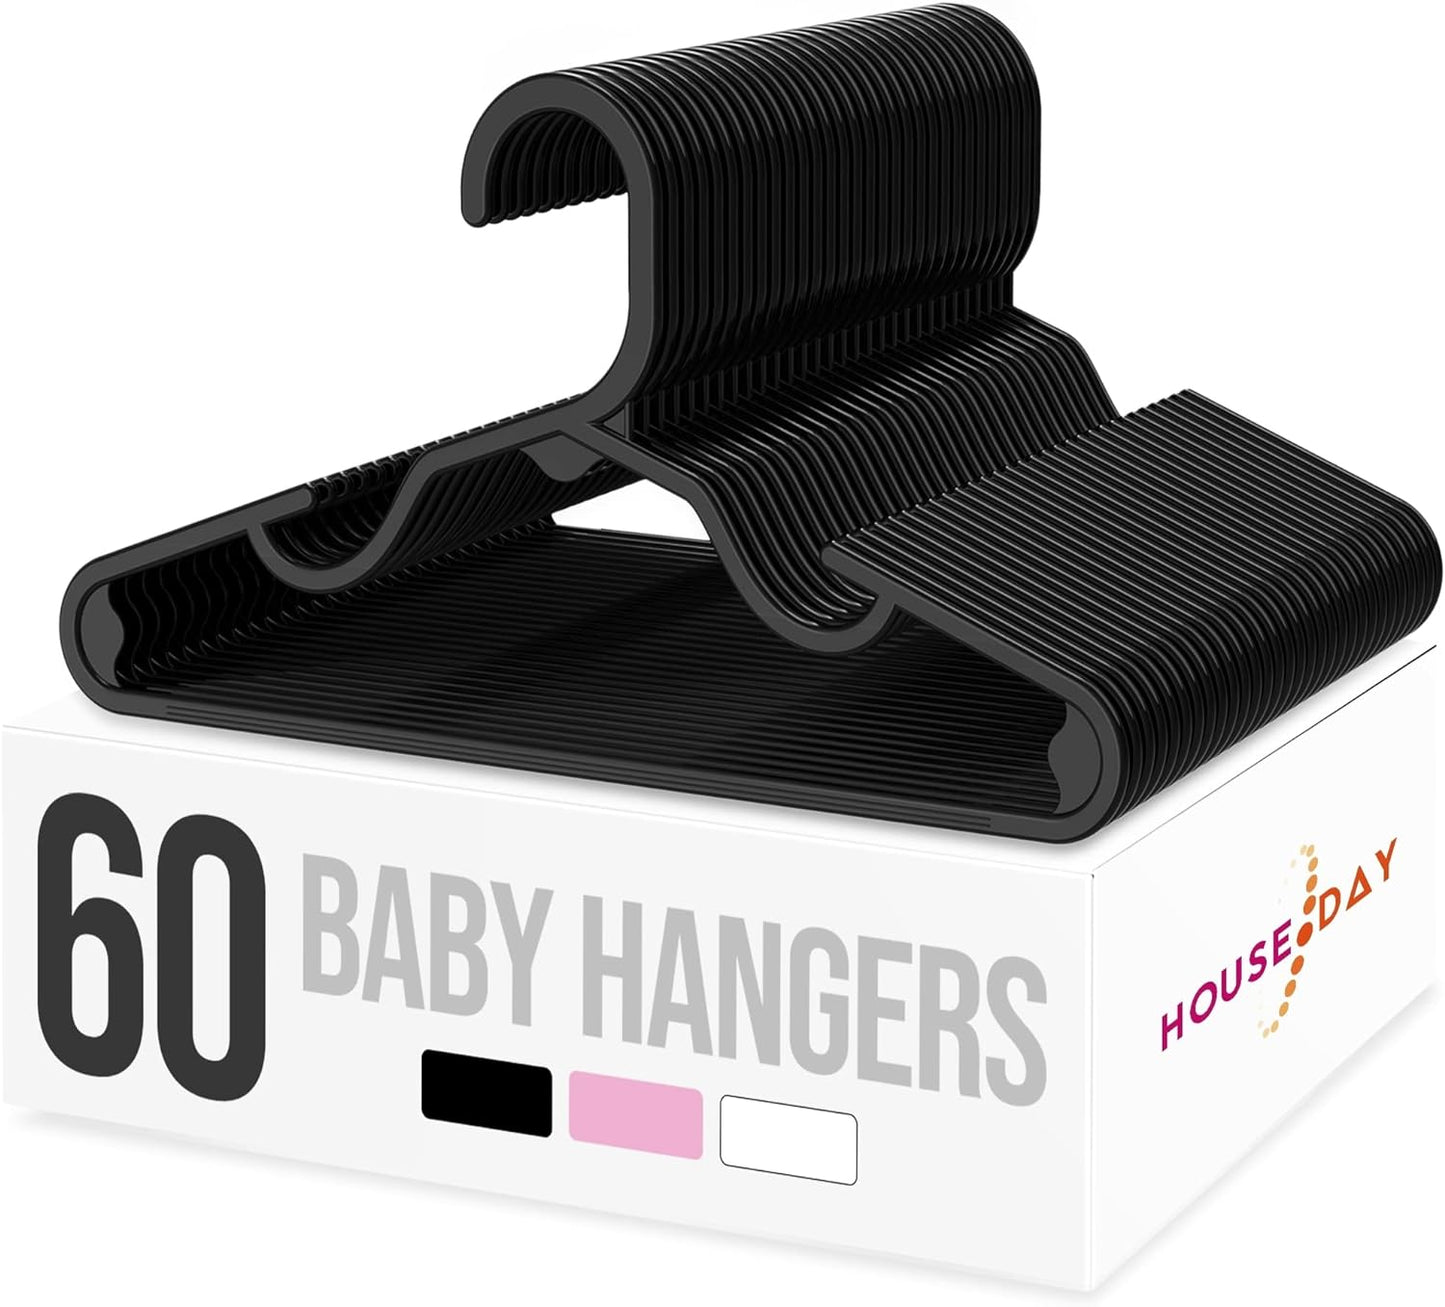 HOUSE DAY 11.7x6.5 Inch Plastic Baby Hangers for Closet Black 60 Pack